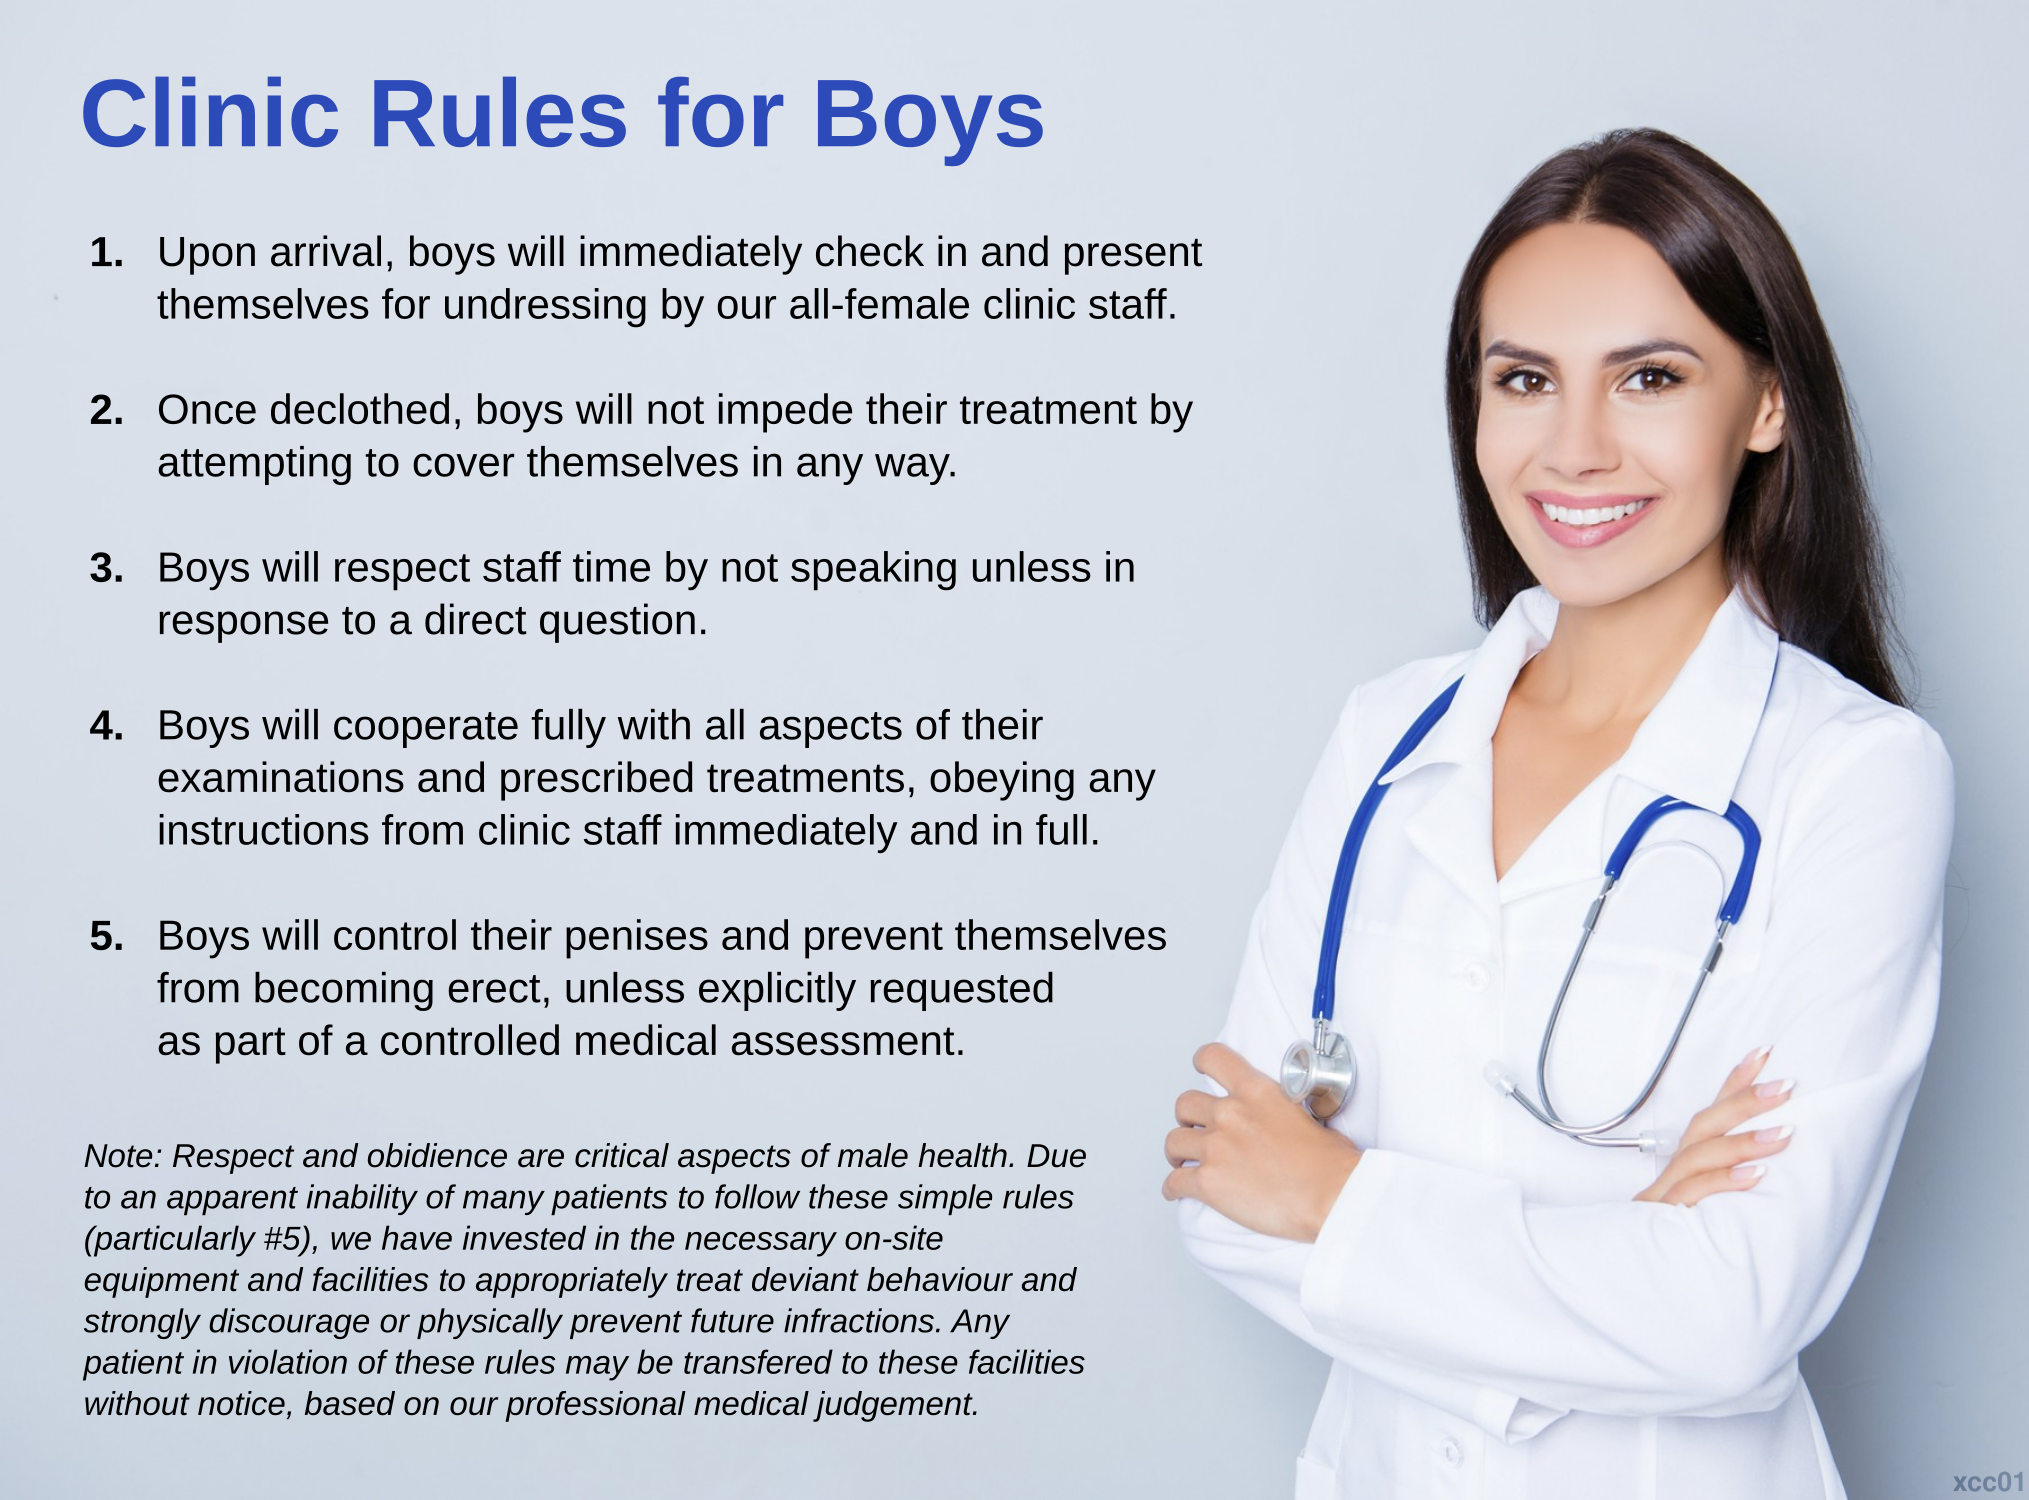 Clinic Rules for Boys: 1) Upon arrival, boys will immediately check in
   and present themselves for undressing by our all-female clinic
   staff.
2) Once declothed, boys will not impede their treatment by attempting
   to cover themselves in any way.
3) Boys will respect staff time by not speaking unless in response
   to a direct question.
4) Boys will cooperate fully with all aspects of their examinations
   and prescribed treatments, obeying any instructions from clinic
   staff immediately and in full.
5) Boys will control their penises and prevent themselves from
   becoming erect, unless explicitly requested as part of a controlled
   medical assessment.
Note: Respect and obidience are critical aspects of male health. Due to an apparent inability of many patients to follow these simple rules (particularly #5), we have invested in the necessary on-site equipment and facilities to appropriately treat deviant behaviour and strongly discourage or physically prevent future infractions. Any patient in violation of these rules may be transferred to these facilities without notice, based on our professional medical judgement.
